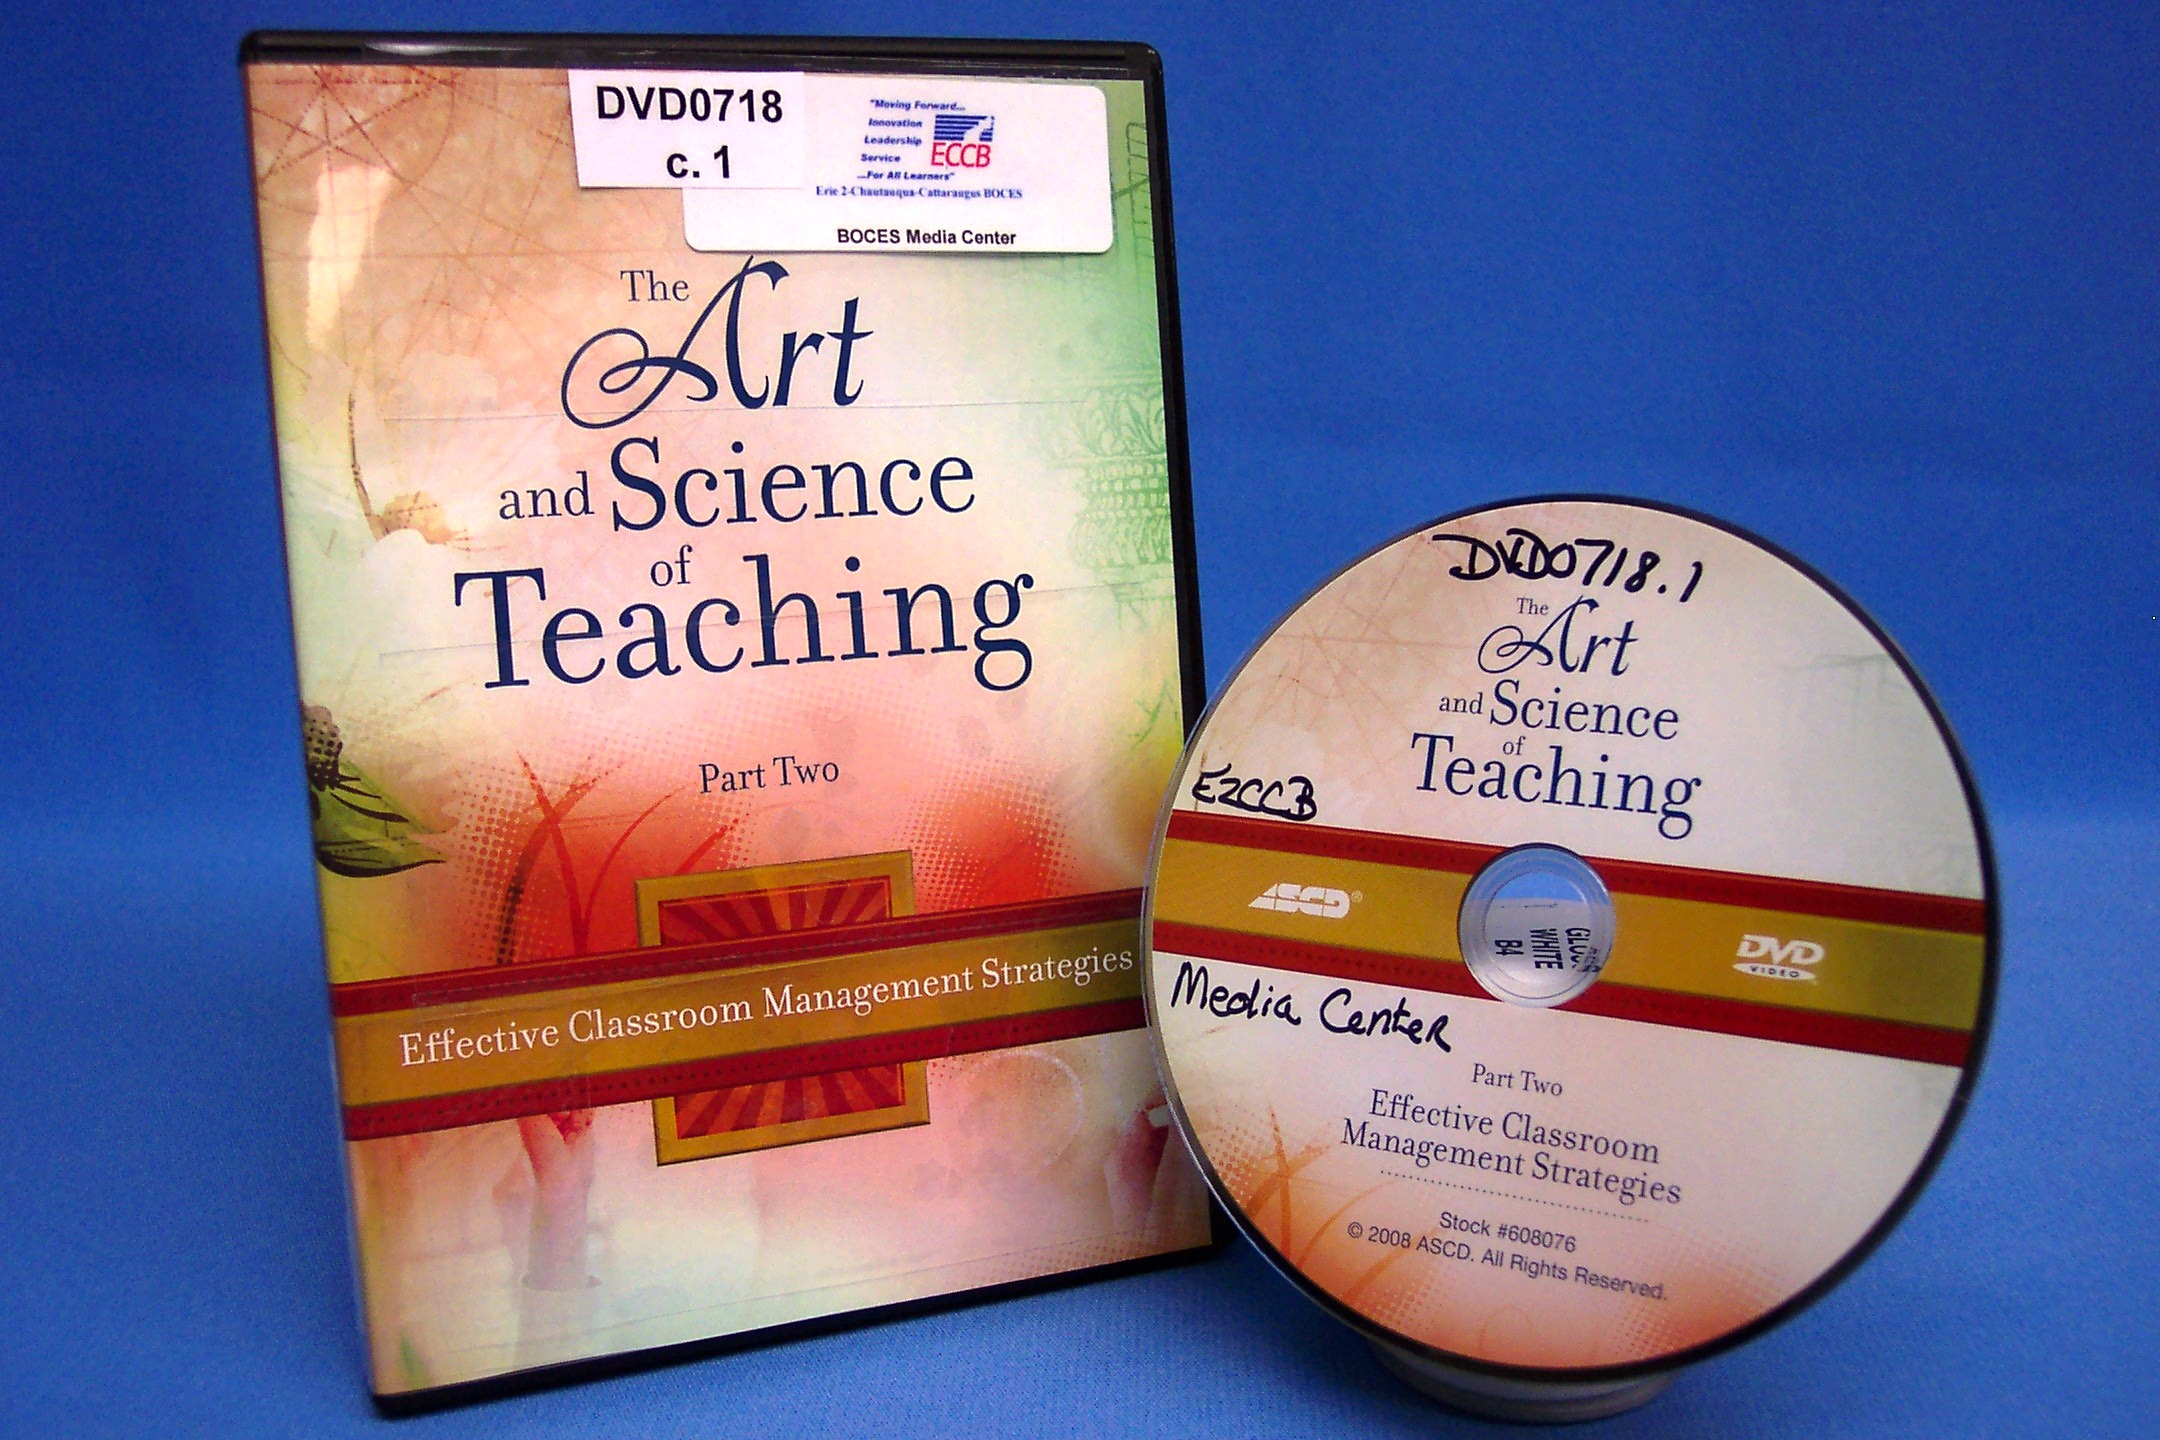 Art and Science of Teaching Part 2: Effective Classroom Management Strategies